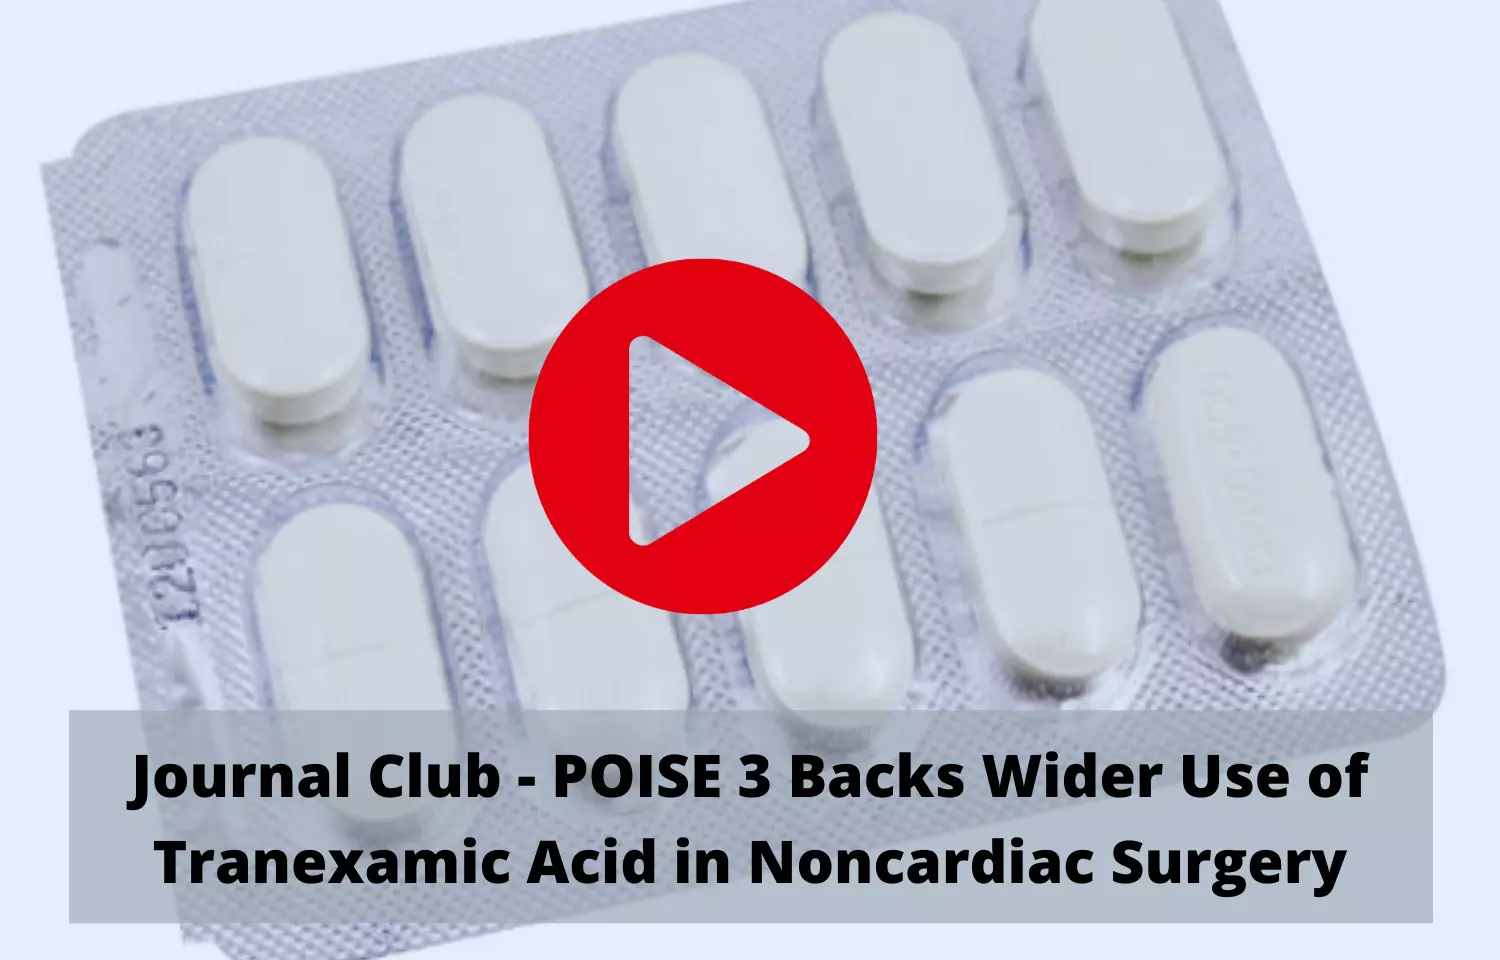 Journal Club - POISE 3 in favour of  Wider Use of Tranexamic Acid in Noncardiac Surgery